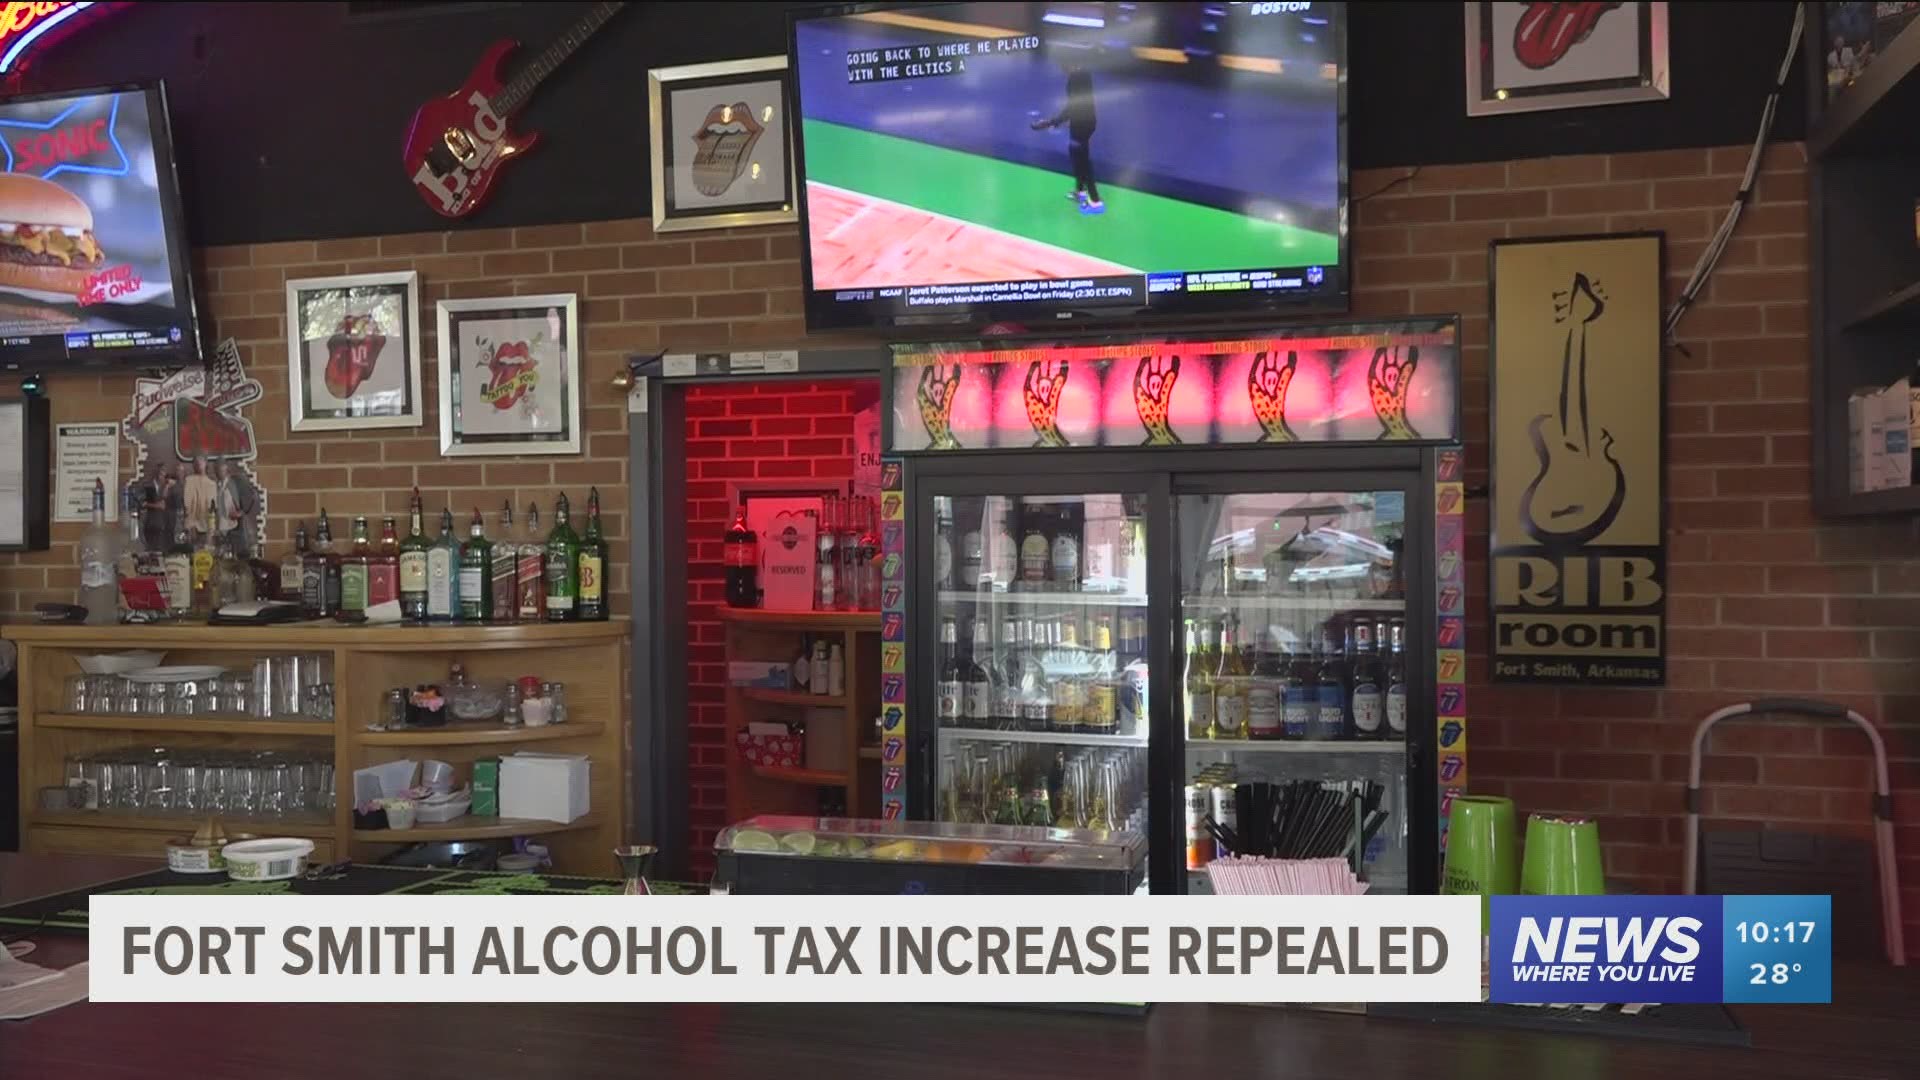 Fort Smith alcohol tax increase repealed